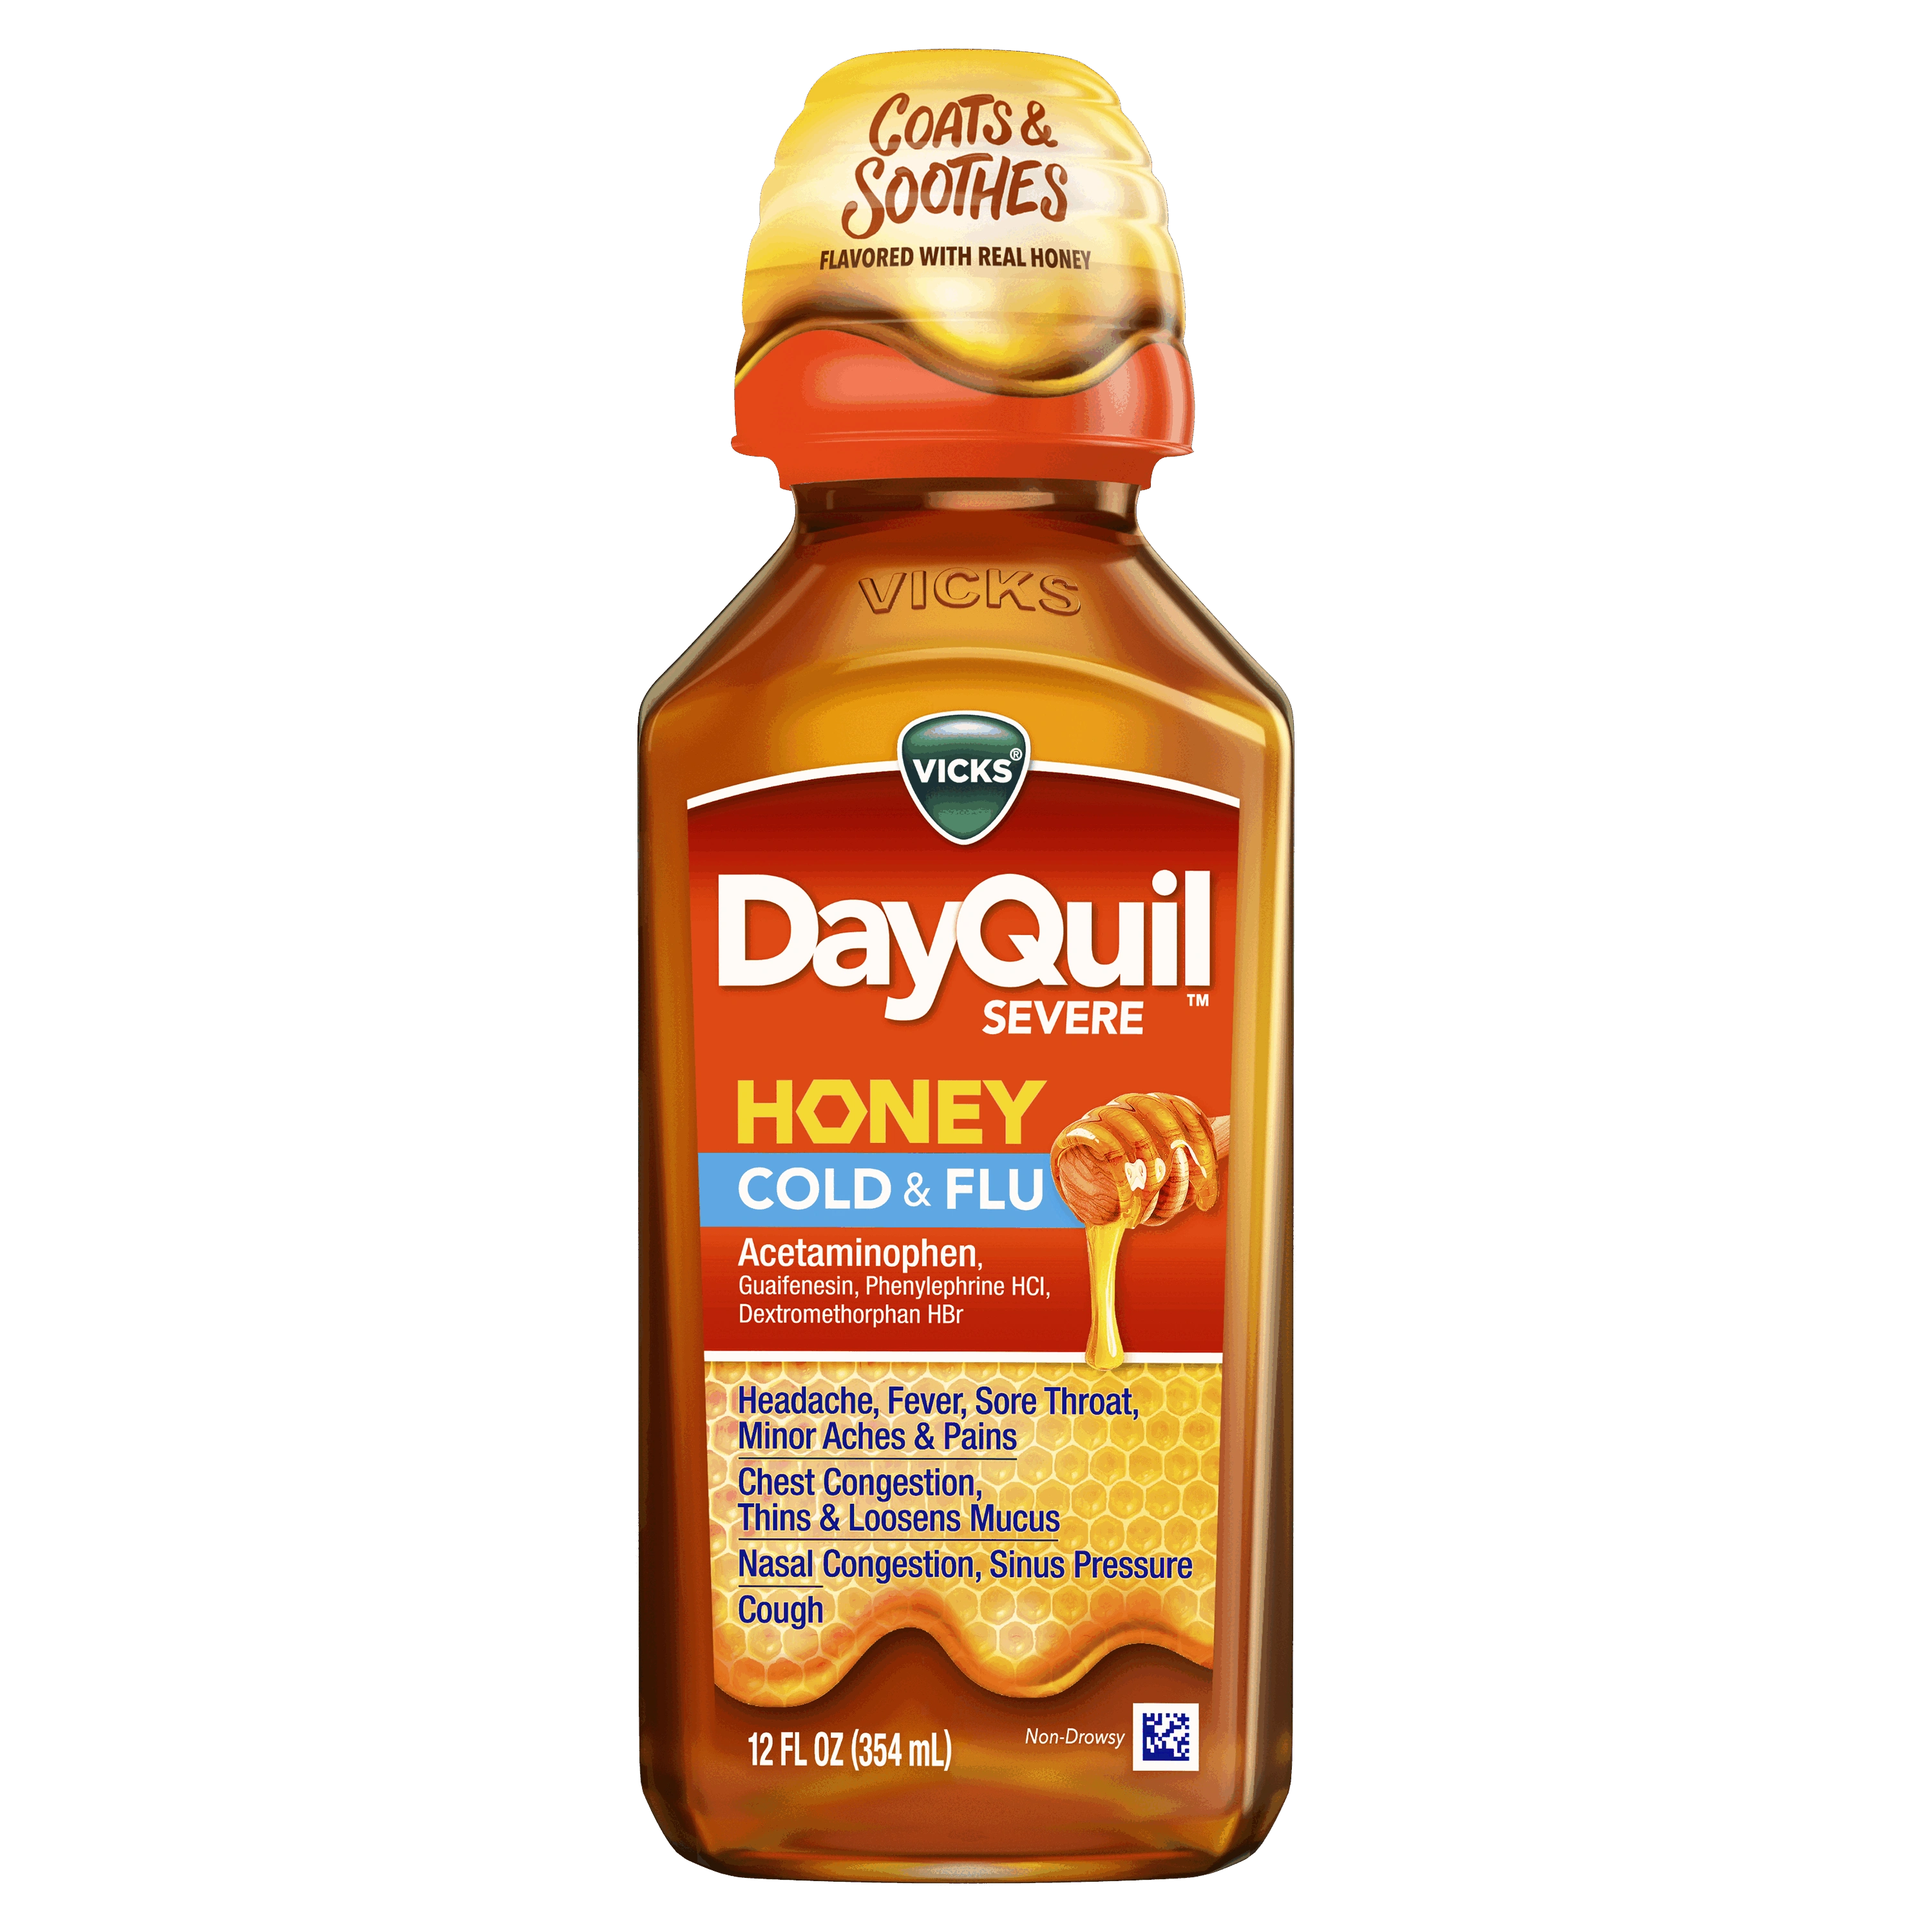 DayQuil™ SEVERE Honey Maximum Strength Cough, Cold & Flu Daytime Relief Liq...